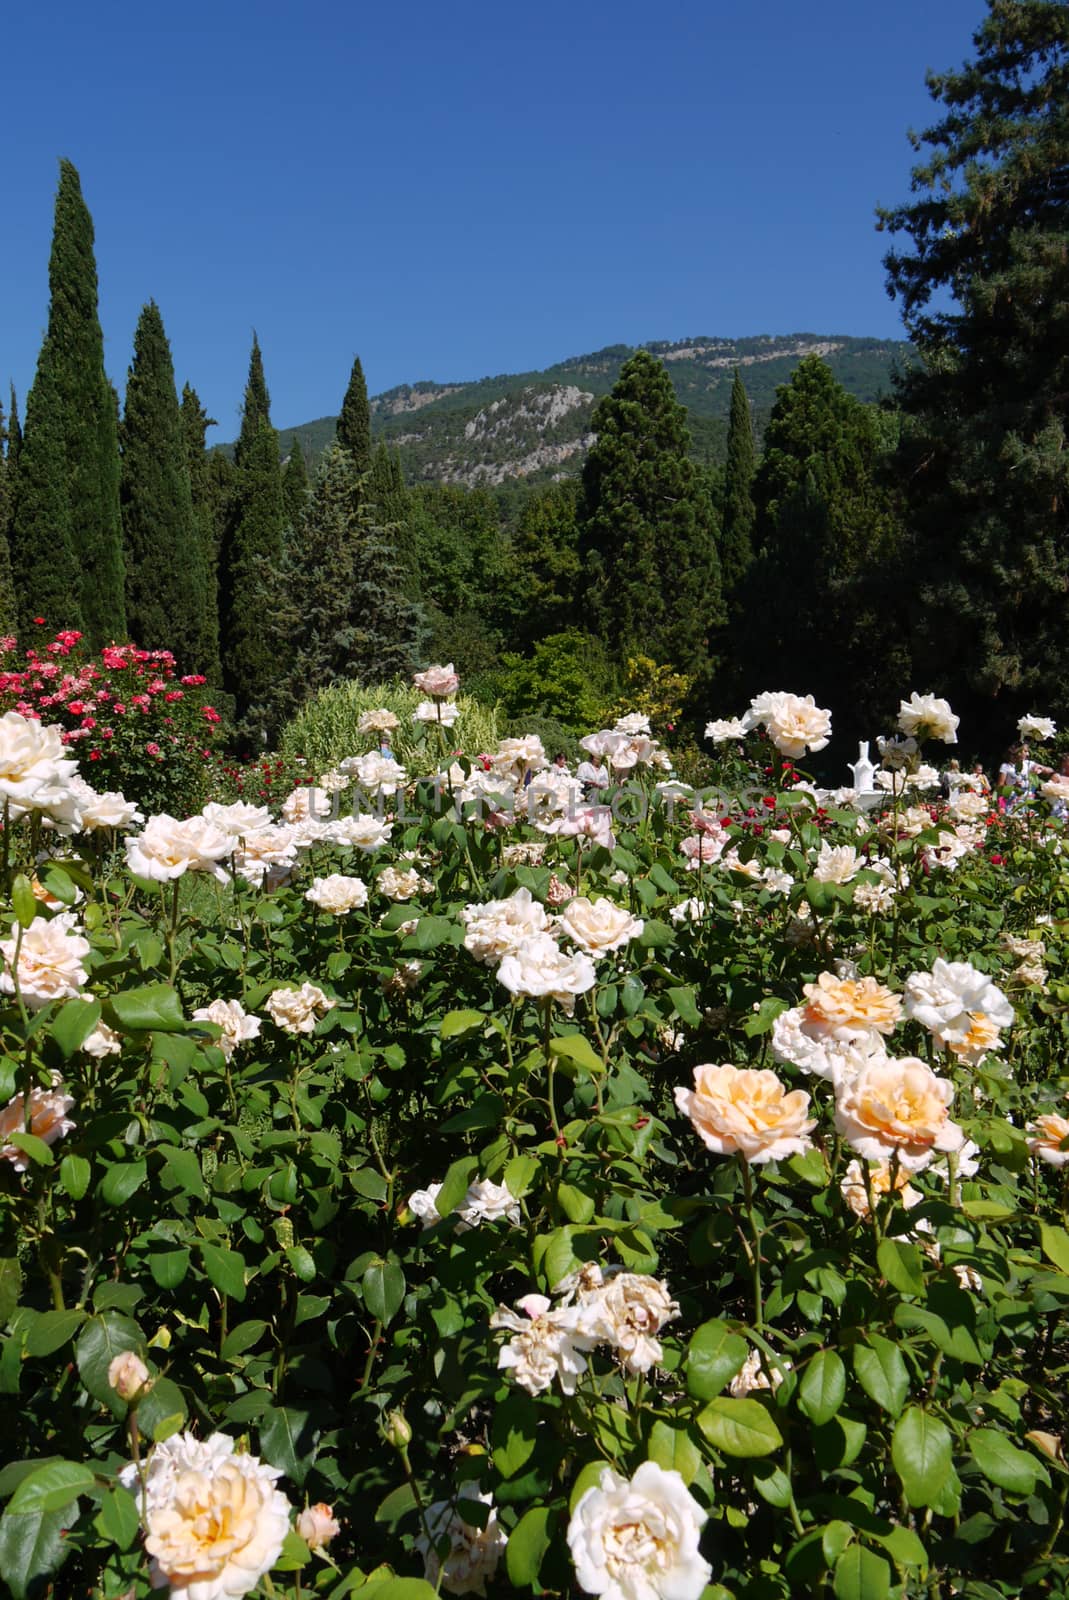 A glade on a mountain slope with growing roses of different colors